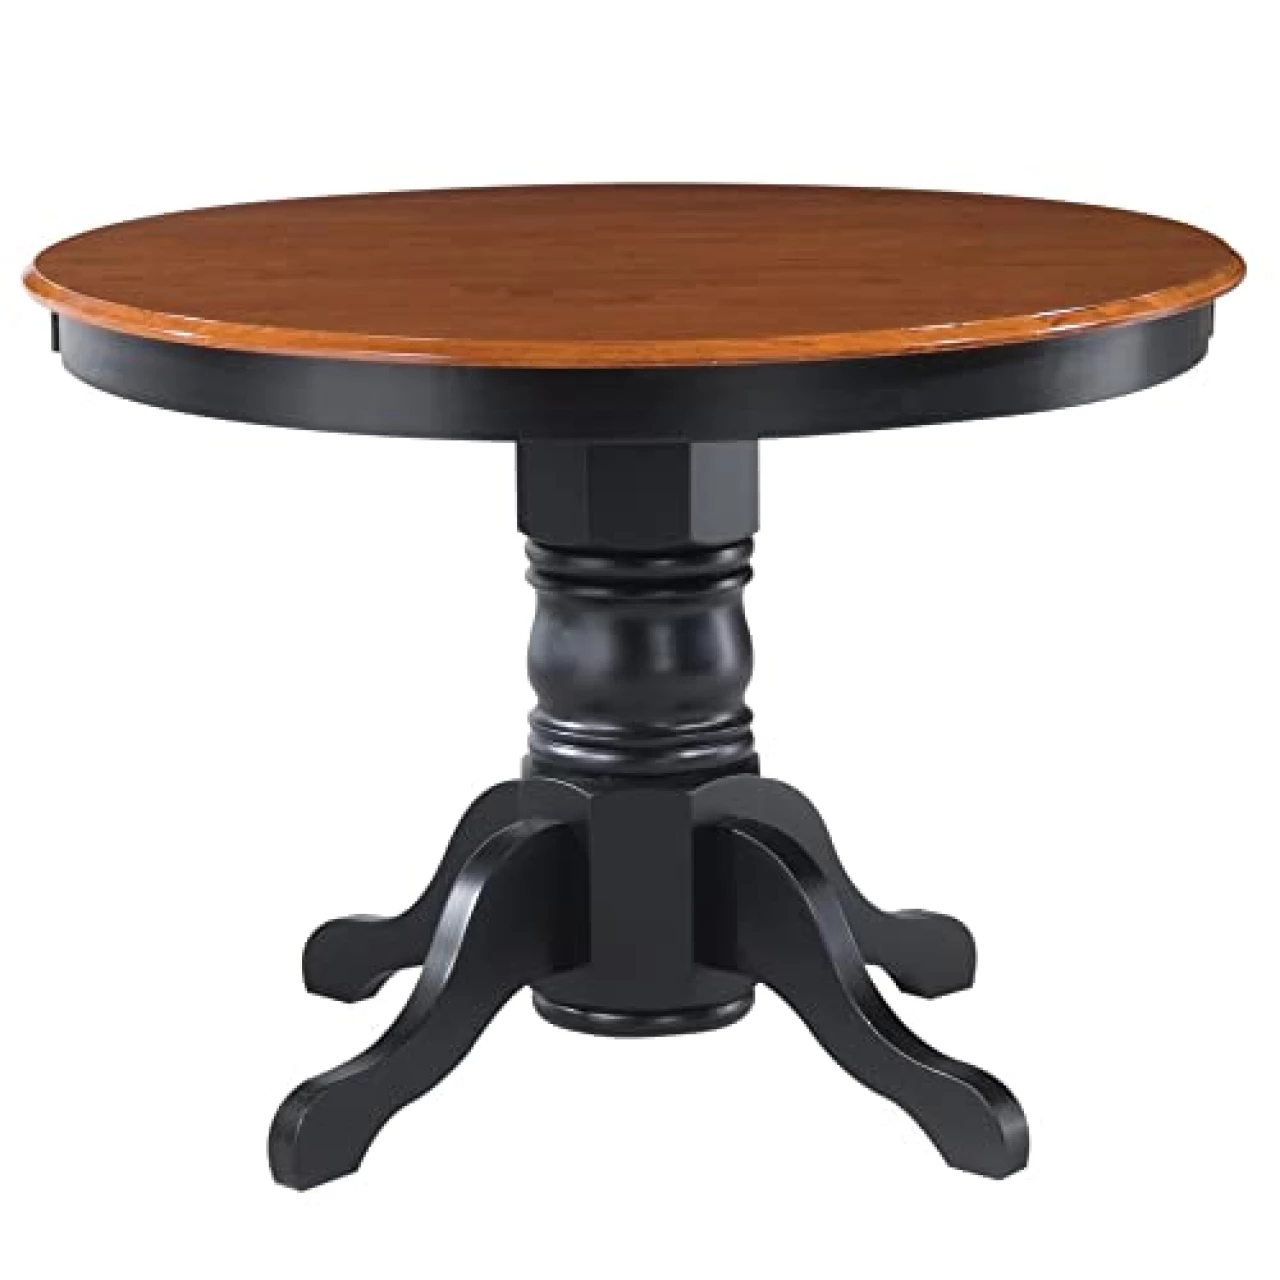 Home Styles Black Oak 42-inch Round Pedestal Dining Table